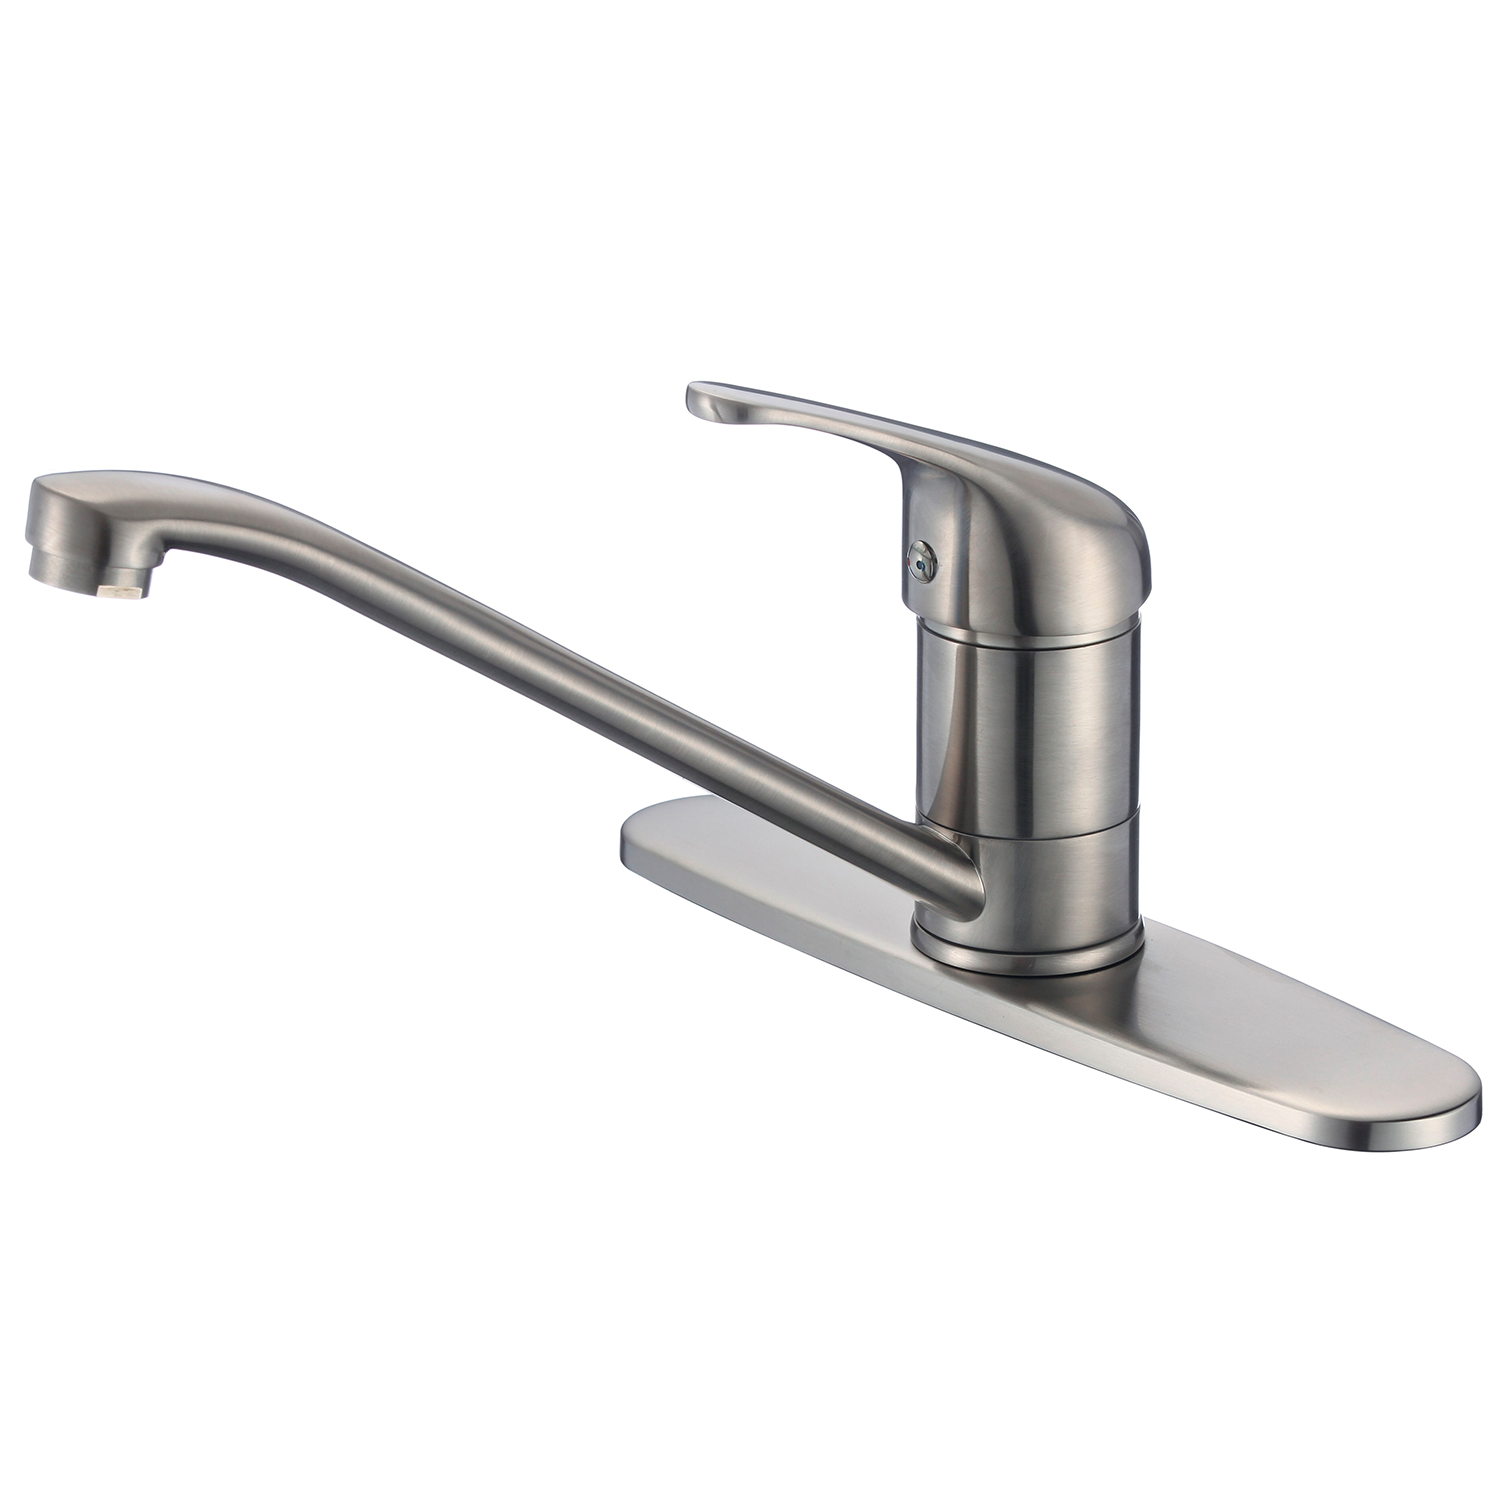 DAX Single Handle Kitchen Faucet with 9 3/4" Brushed Nickel Finish (DAX-8237-BN)